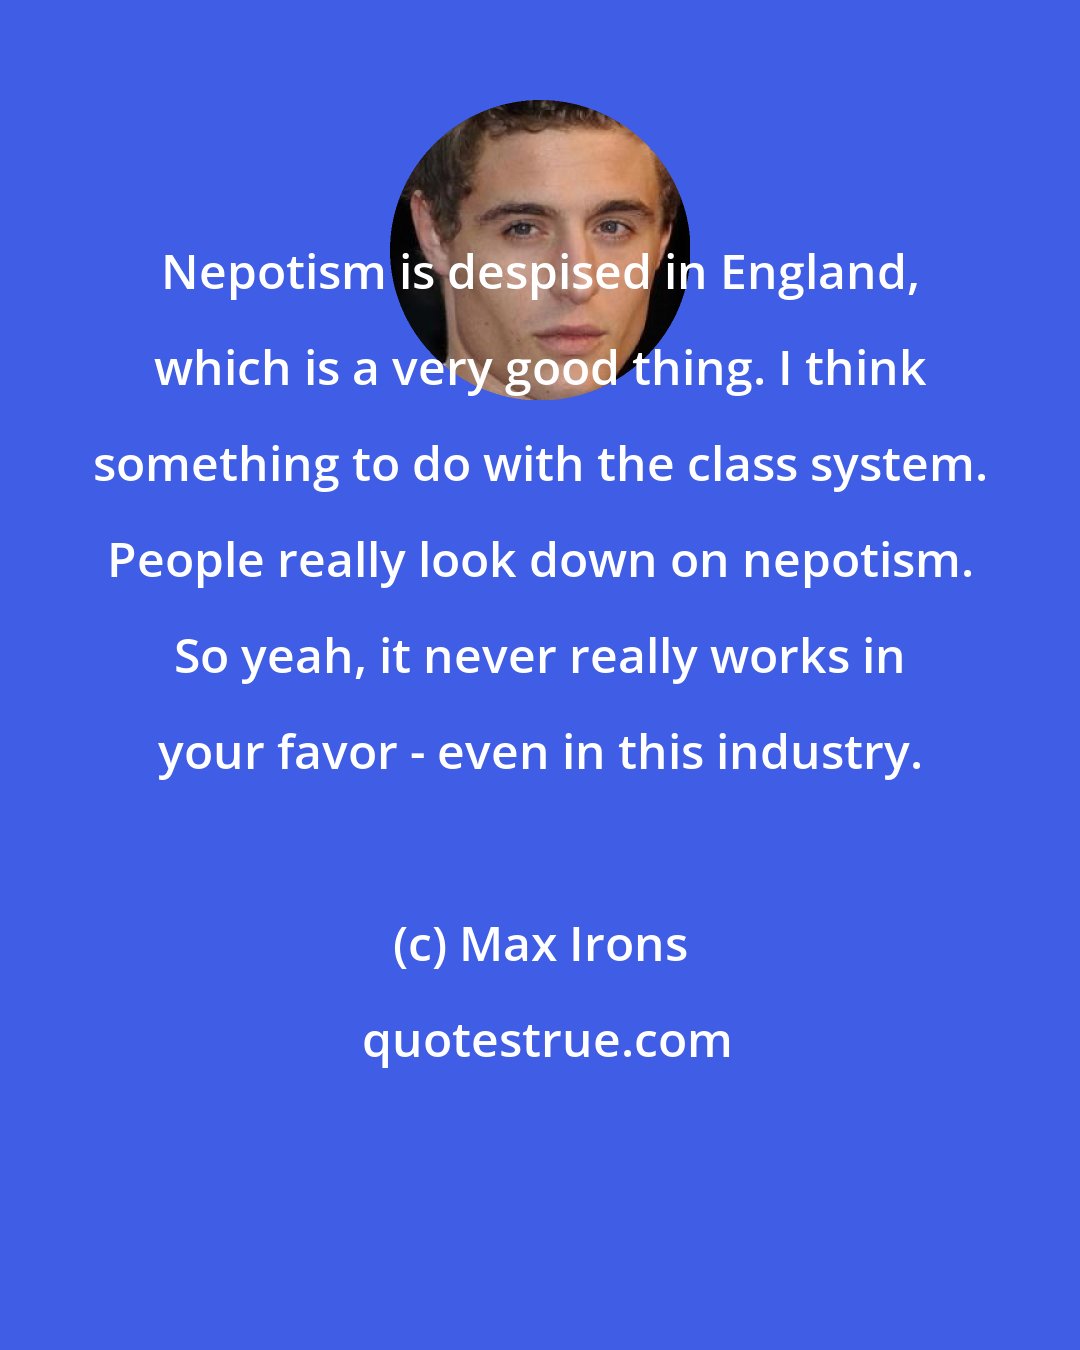 Max Irons: Nepotism is despised in England, which is a very good thing. I think something to do with the class system. People really look down on nepotism. So yeah, it never really works in your favor - even in this industry.